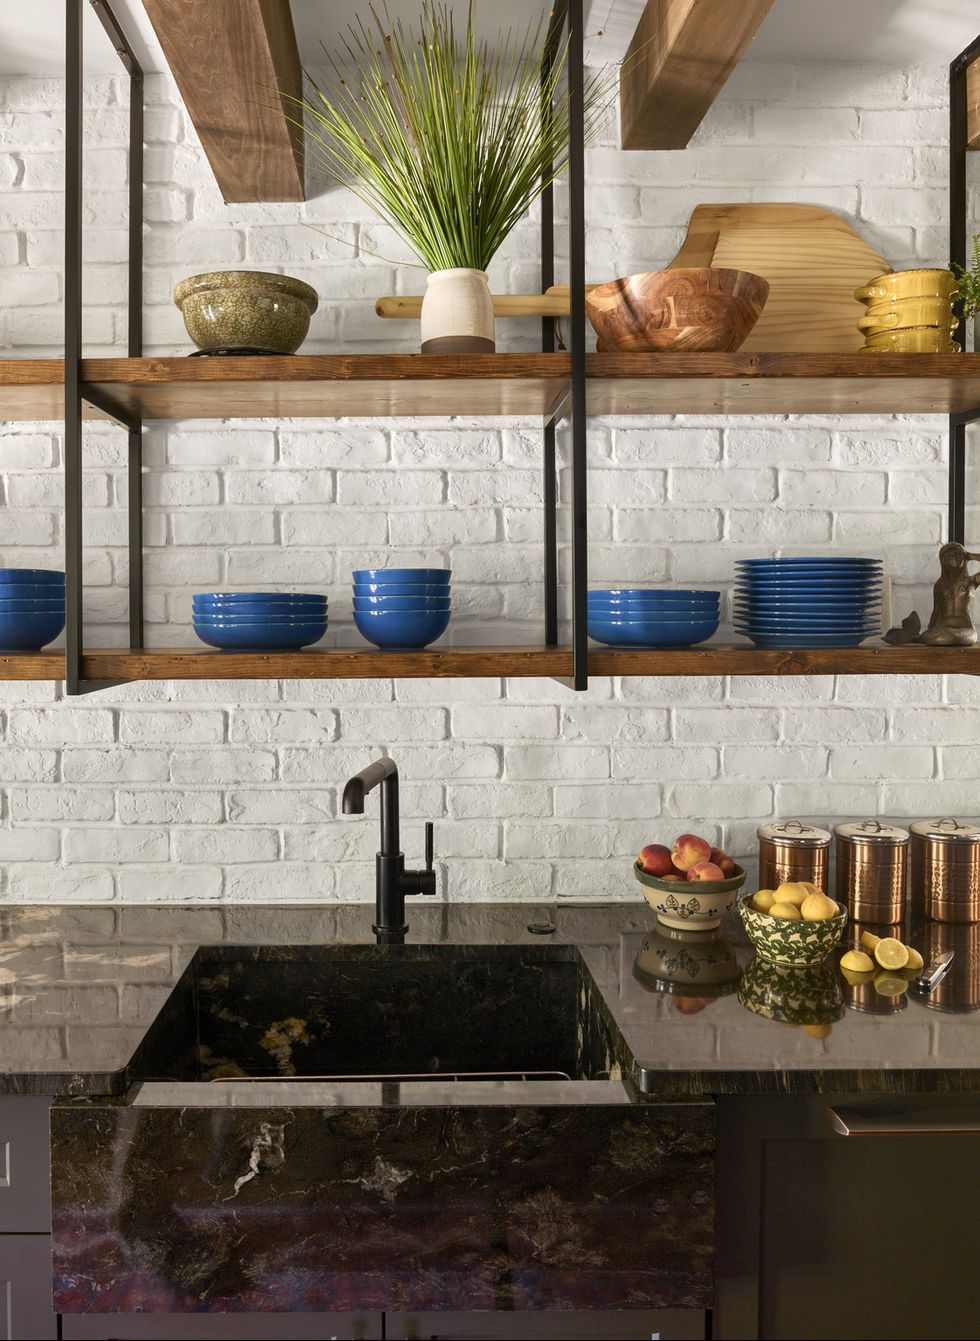 smart shelving to offset dark cabinets and counters, the team wanted the white brick walls to shine through enter custom steel and wood open shelving faucet brizo brick veneer avalon flooring discontinued